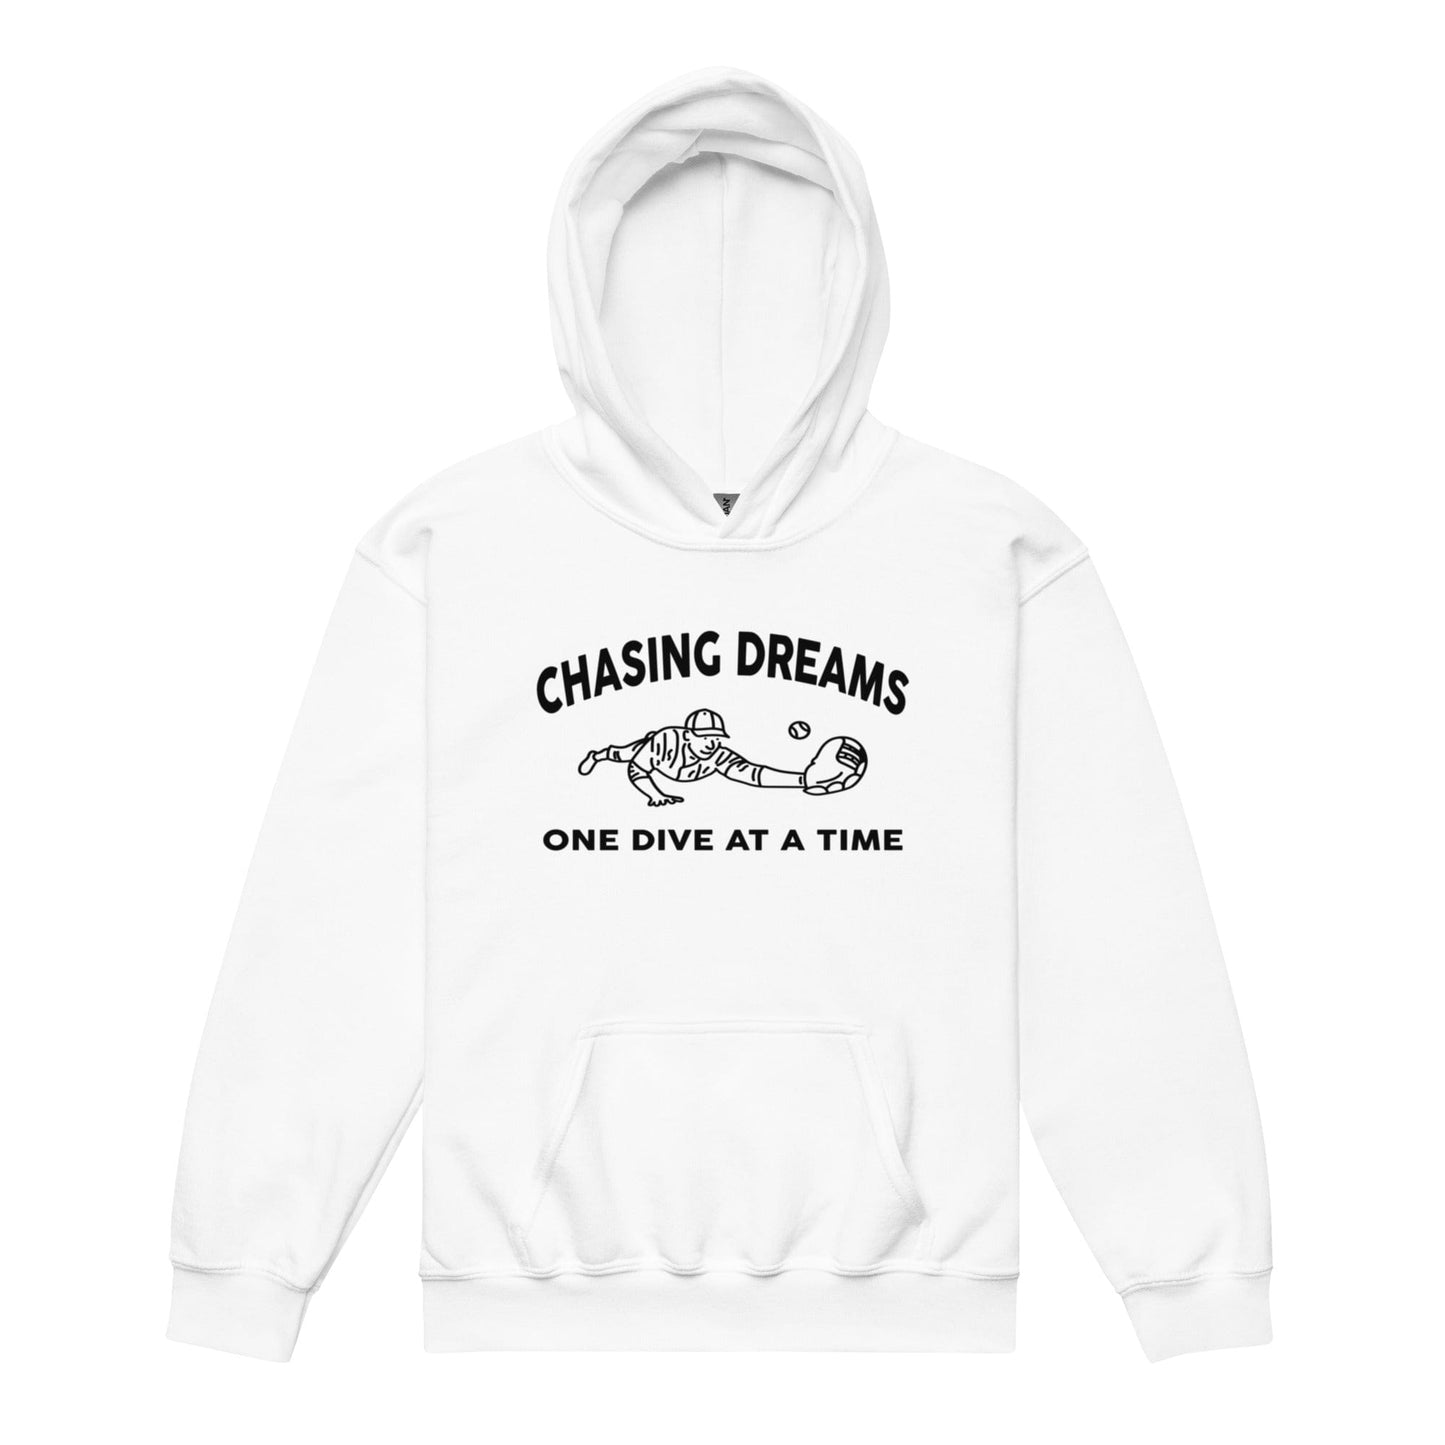 Chasing Dreams One Dive At A Time - Youth Hoodie